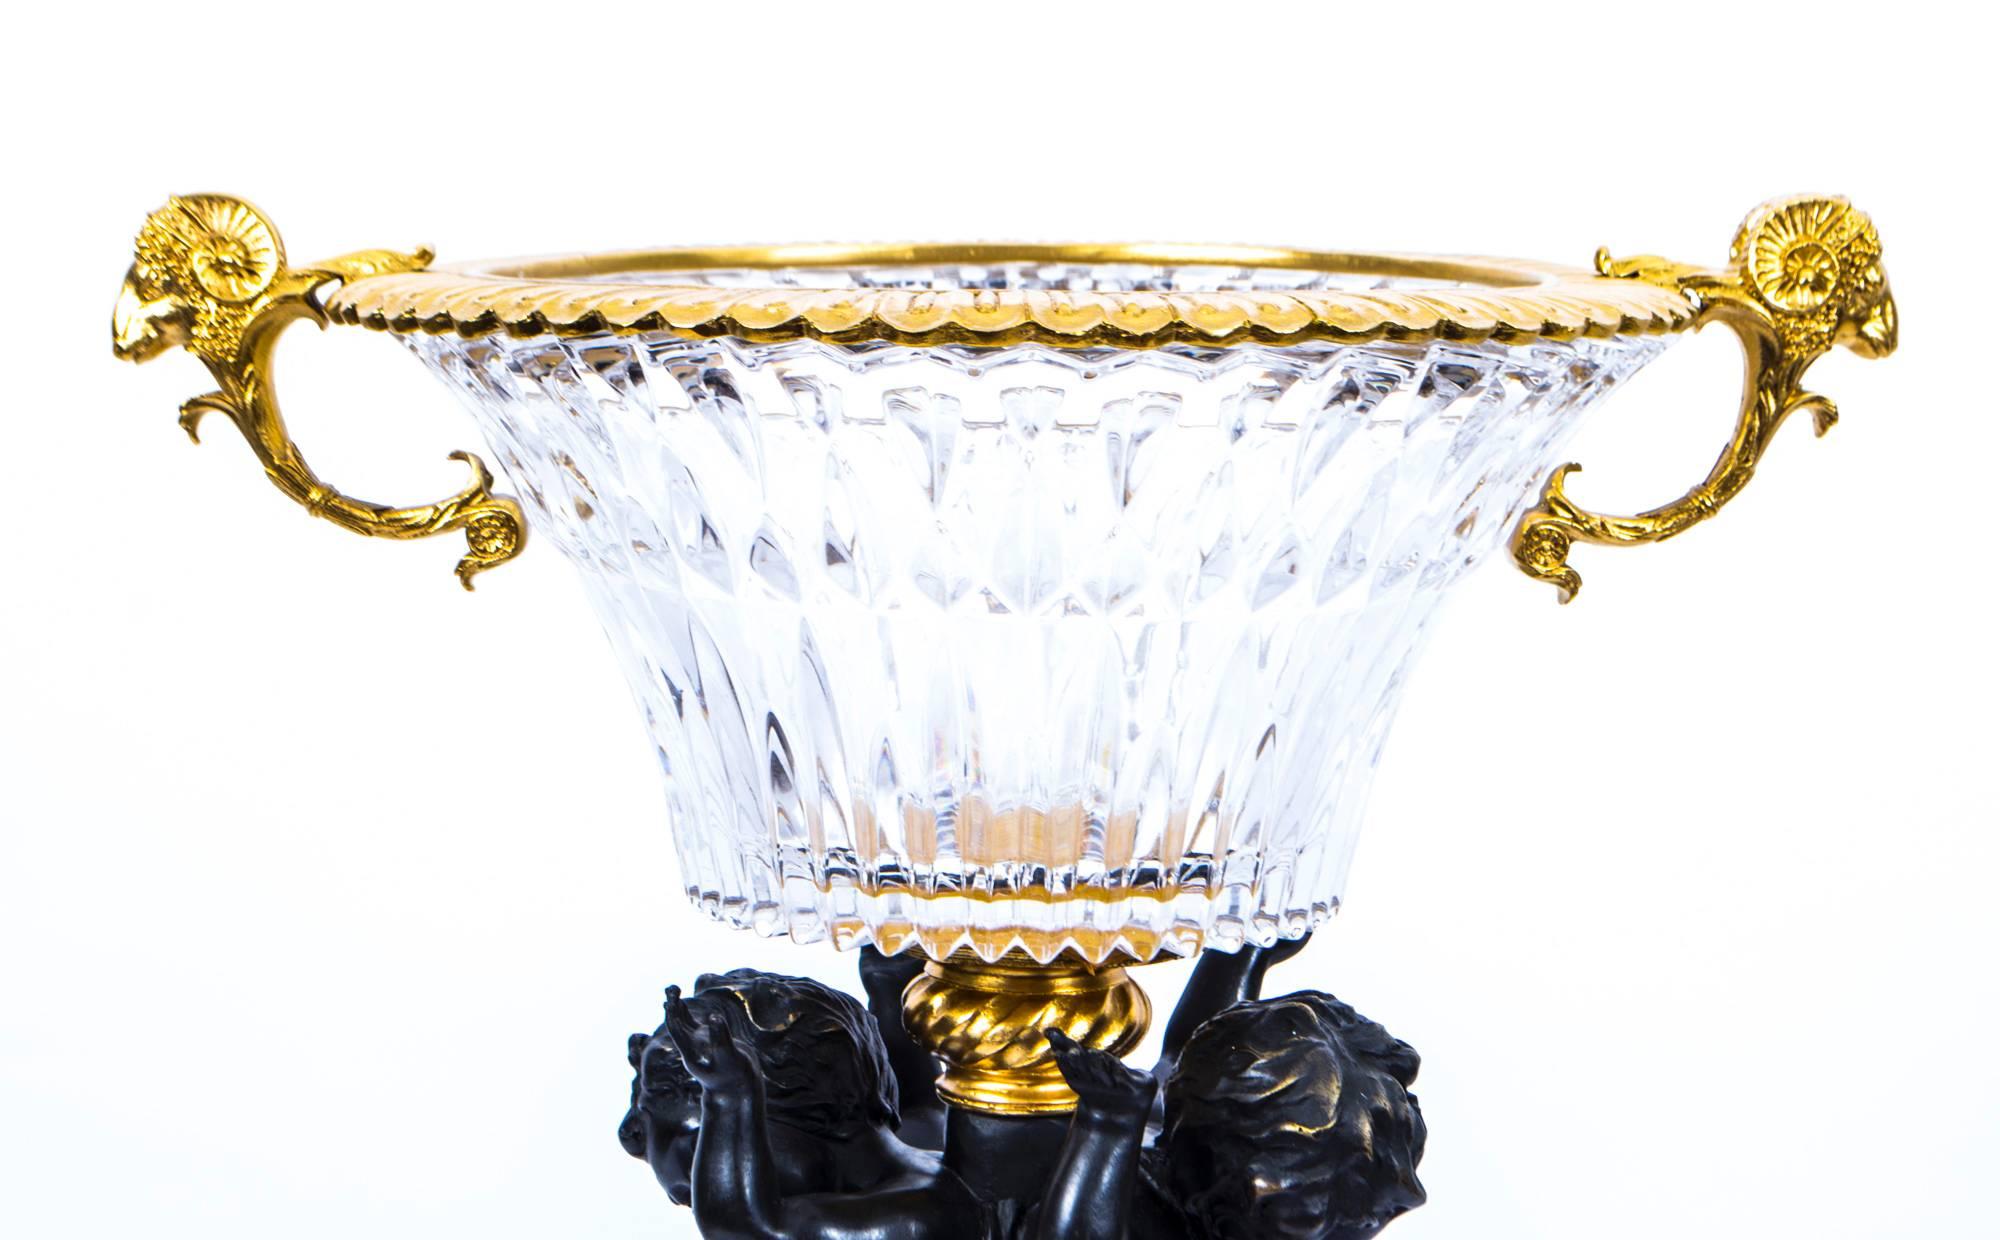 A beautiful cut-glass, ormolu, and bronze cherub centrepiece from the last quarter of the 20th century.

The craftsmanship is second to none throughout all aspects of this stunning piece and it is sure to add an unparalleled touch of class to any